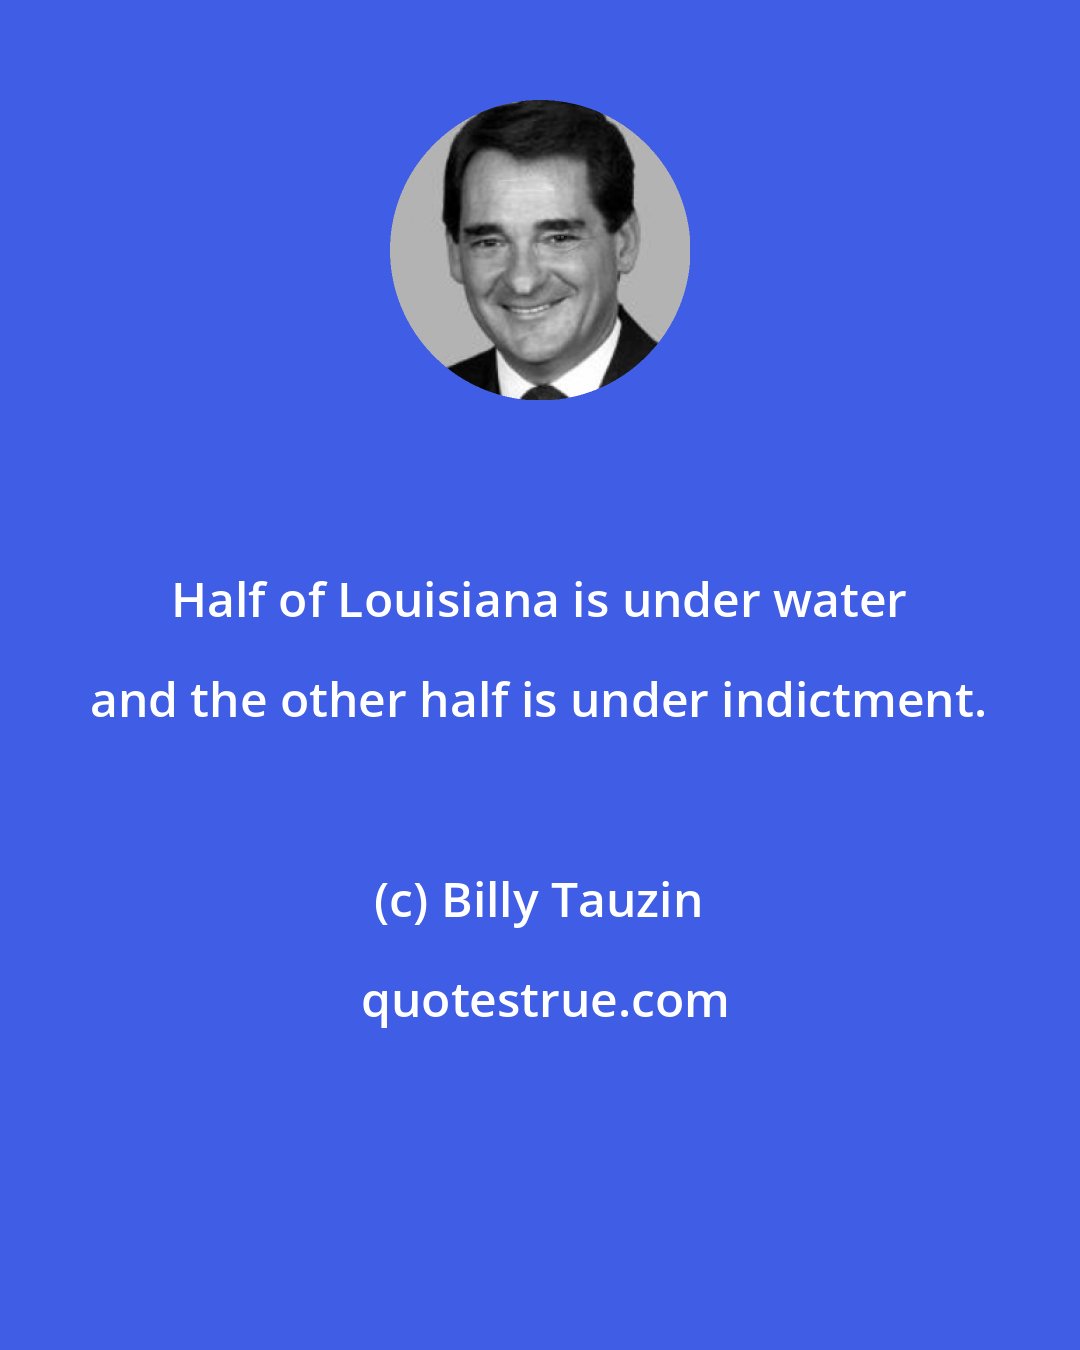 Billy Tauzin: Half of Louisiana is under water and the other half is under indictment.